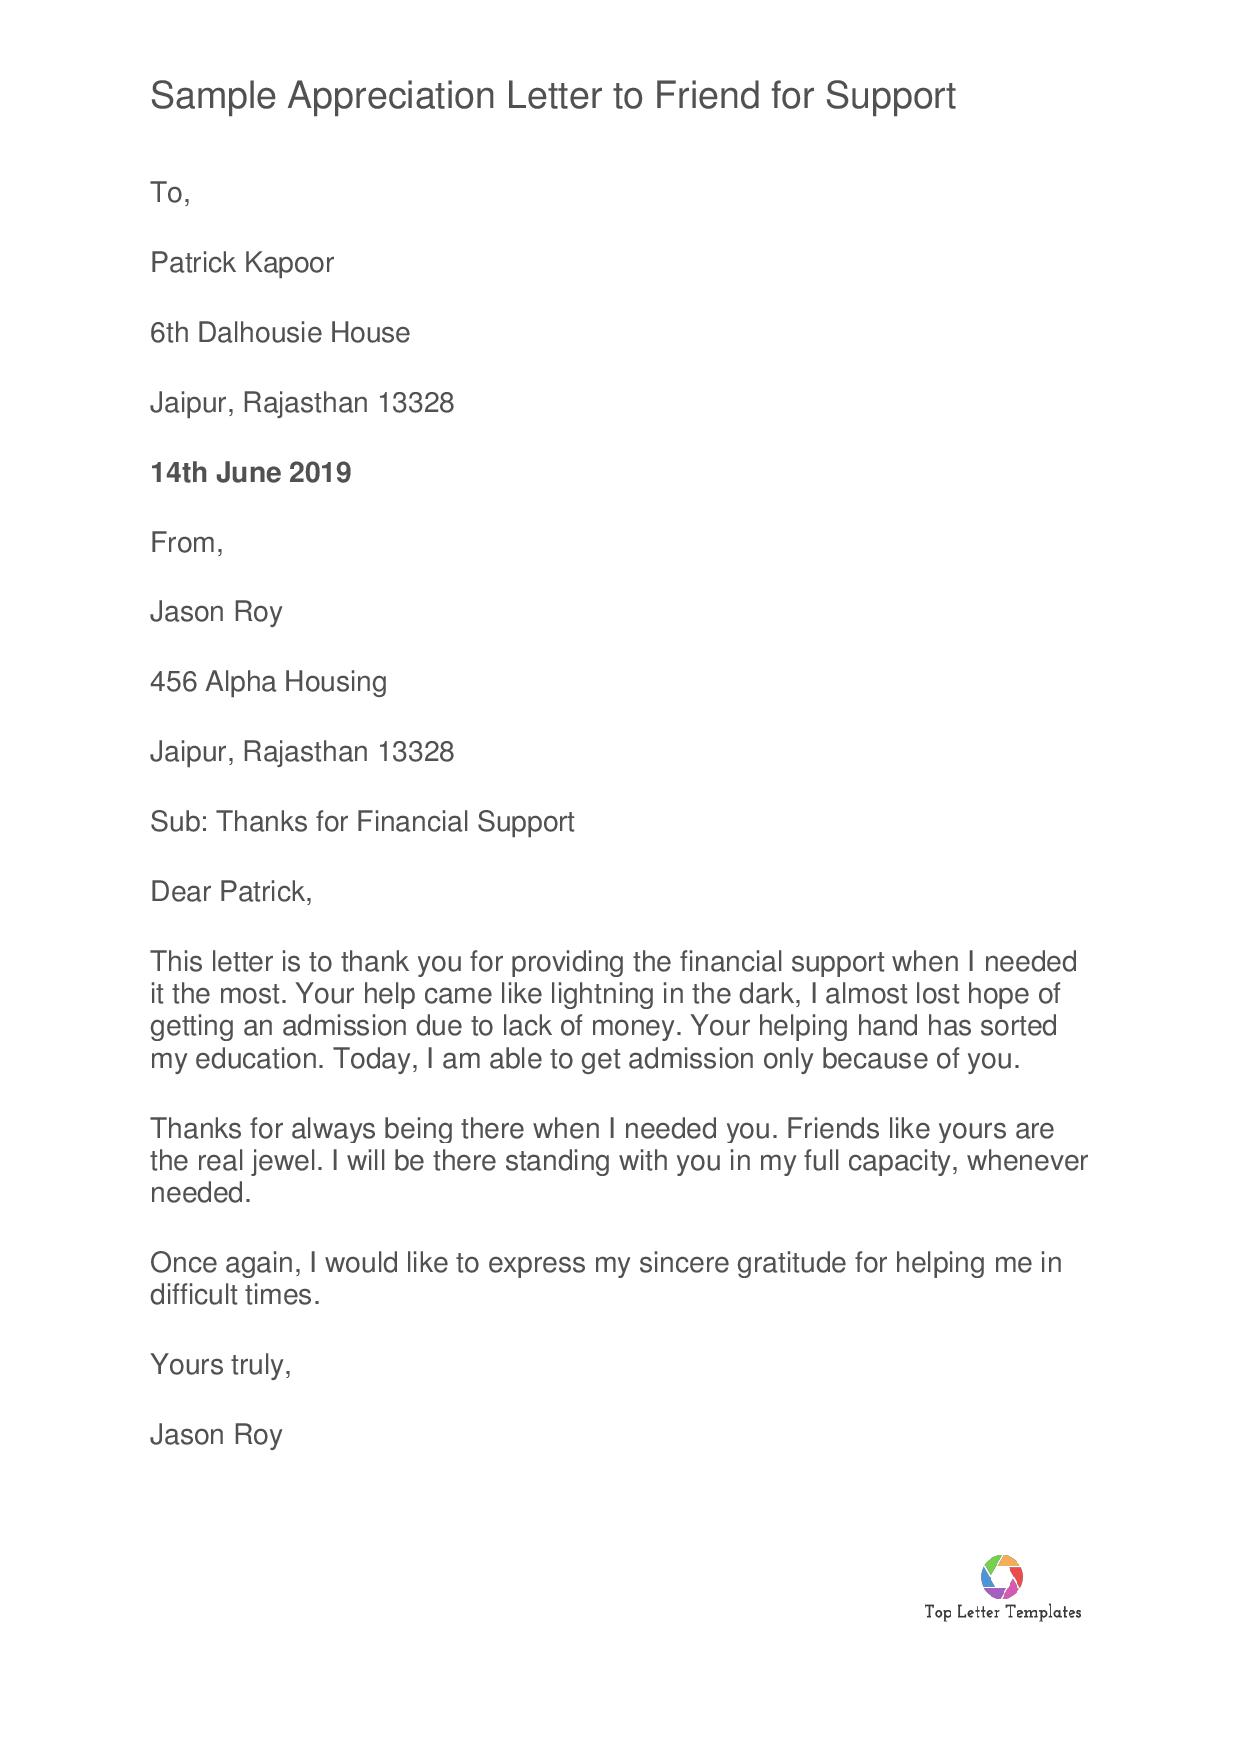 Sample Letter Of Appreciation For Support Pdf Doc Top Letter Templates